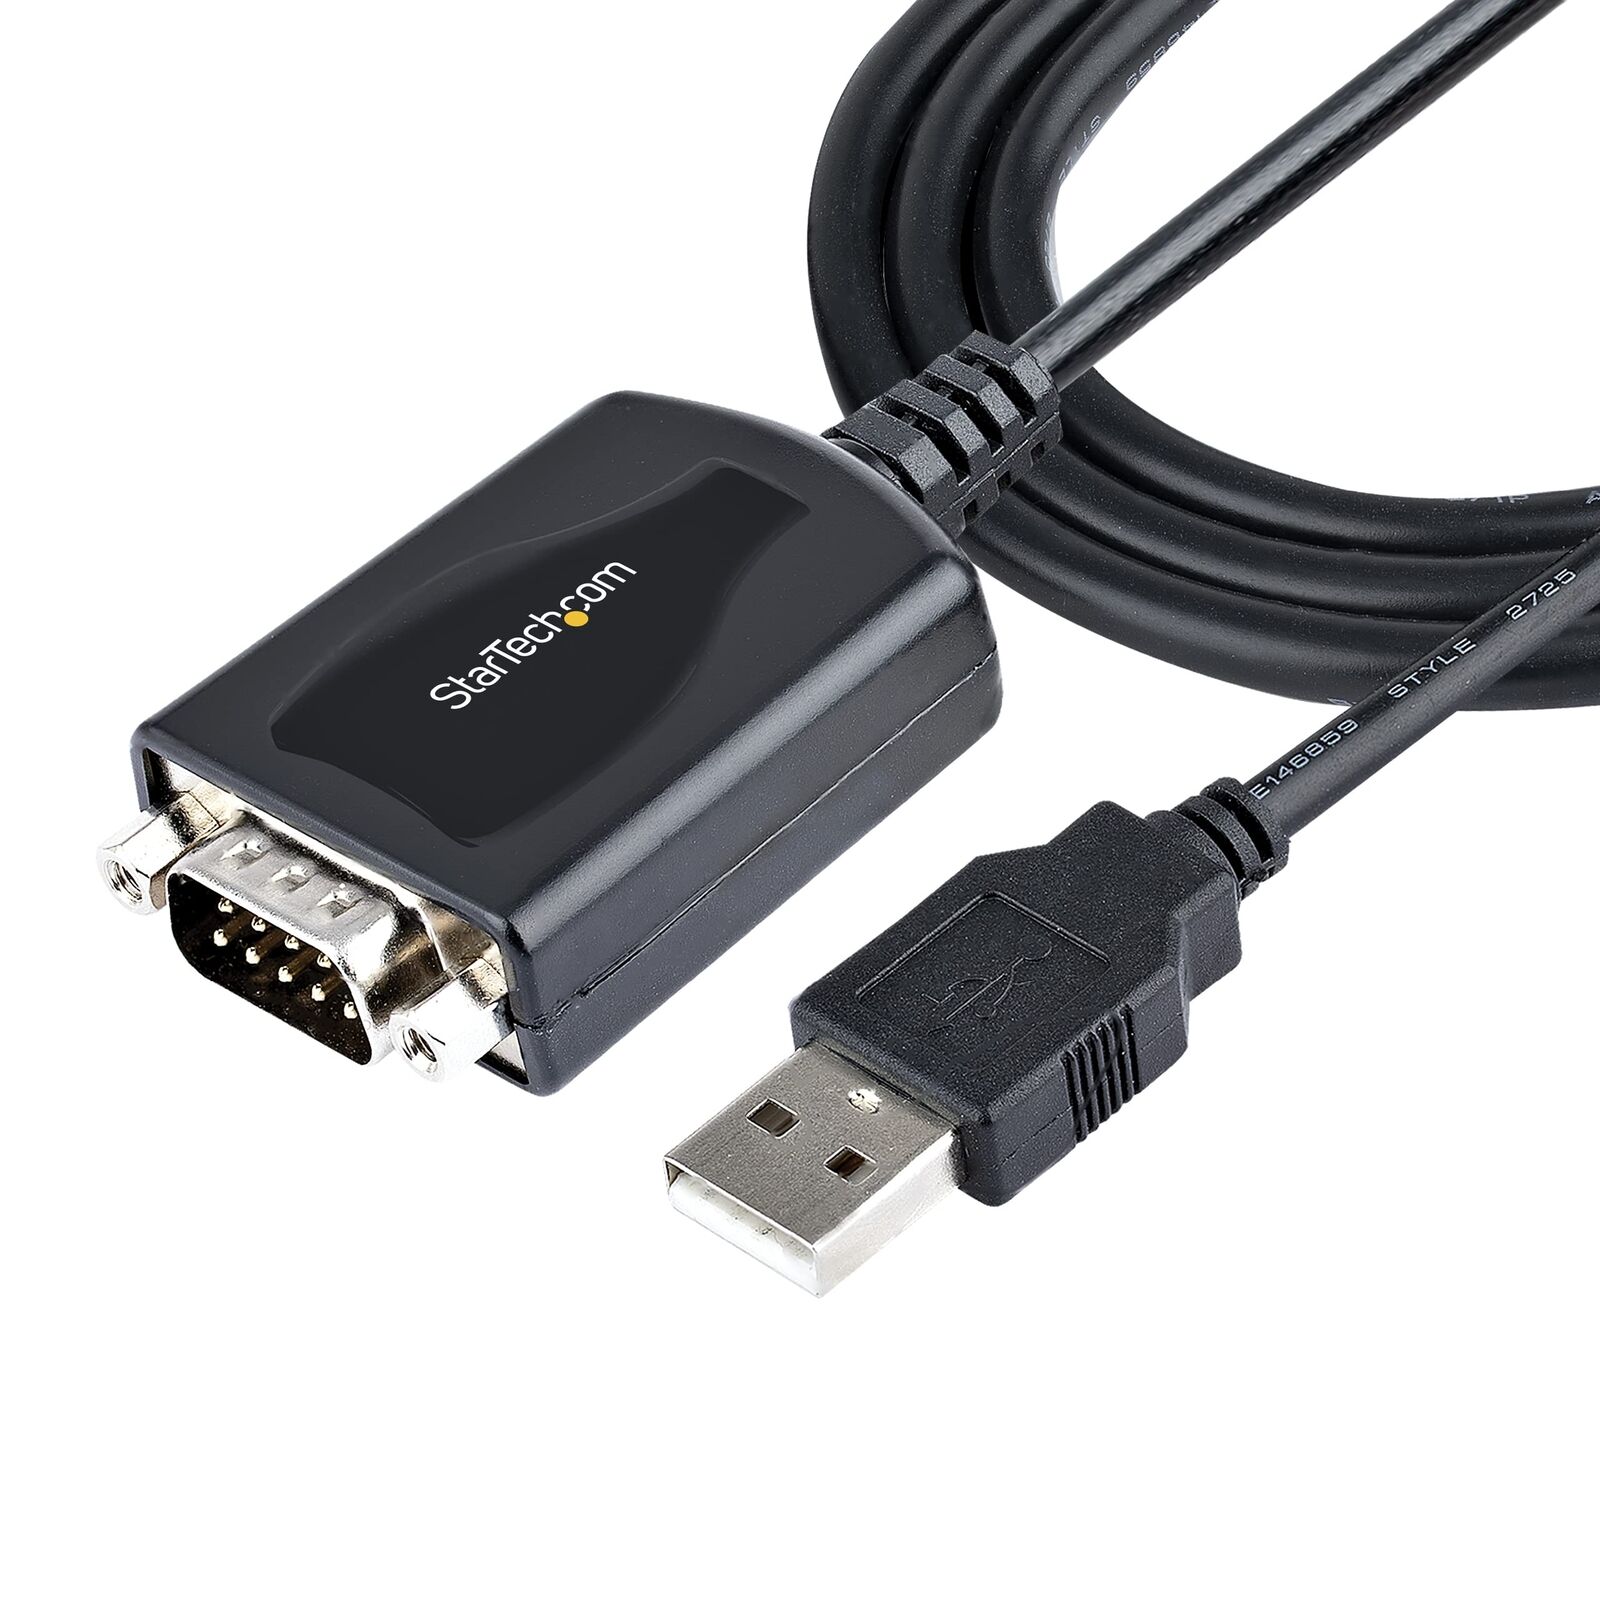 StarTech.com 3ft (1m) USB to Serial Cable with COM Port Retention, DB9 Male RS23